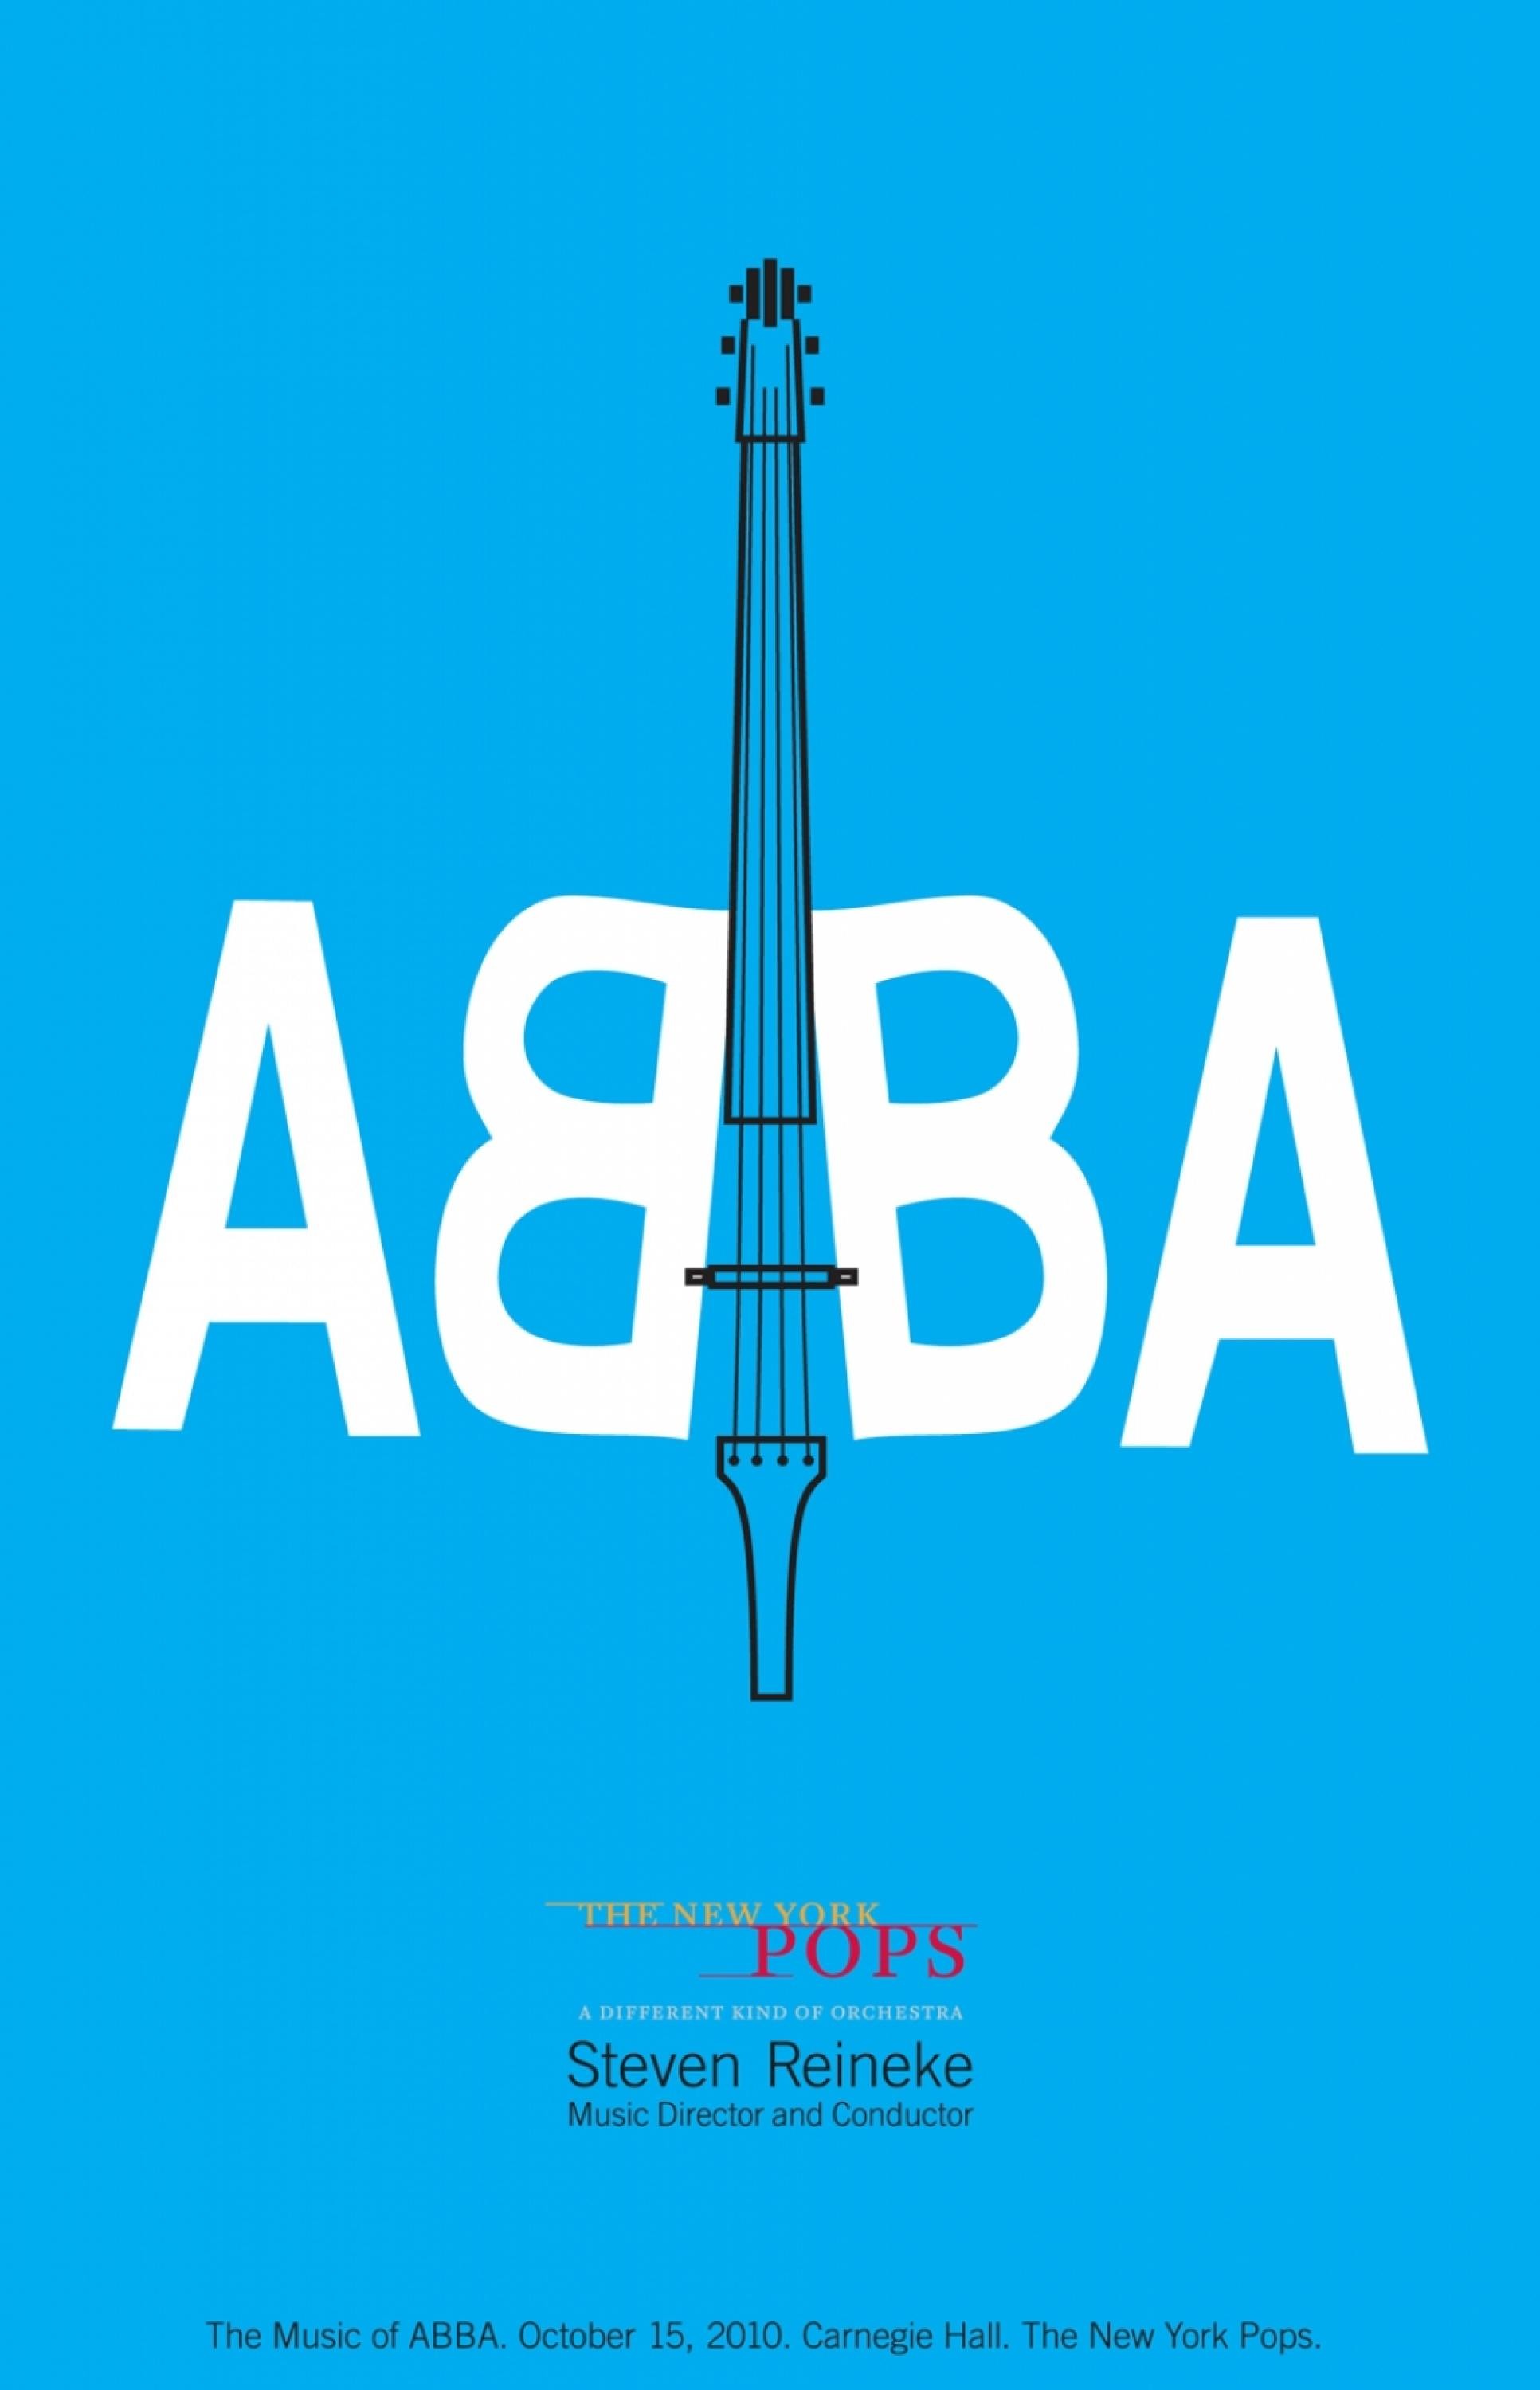 ABBA MUSIC AT CARNEGIE HALL